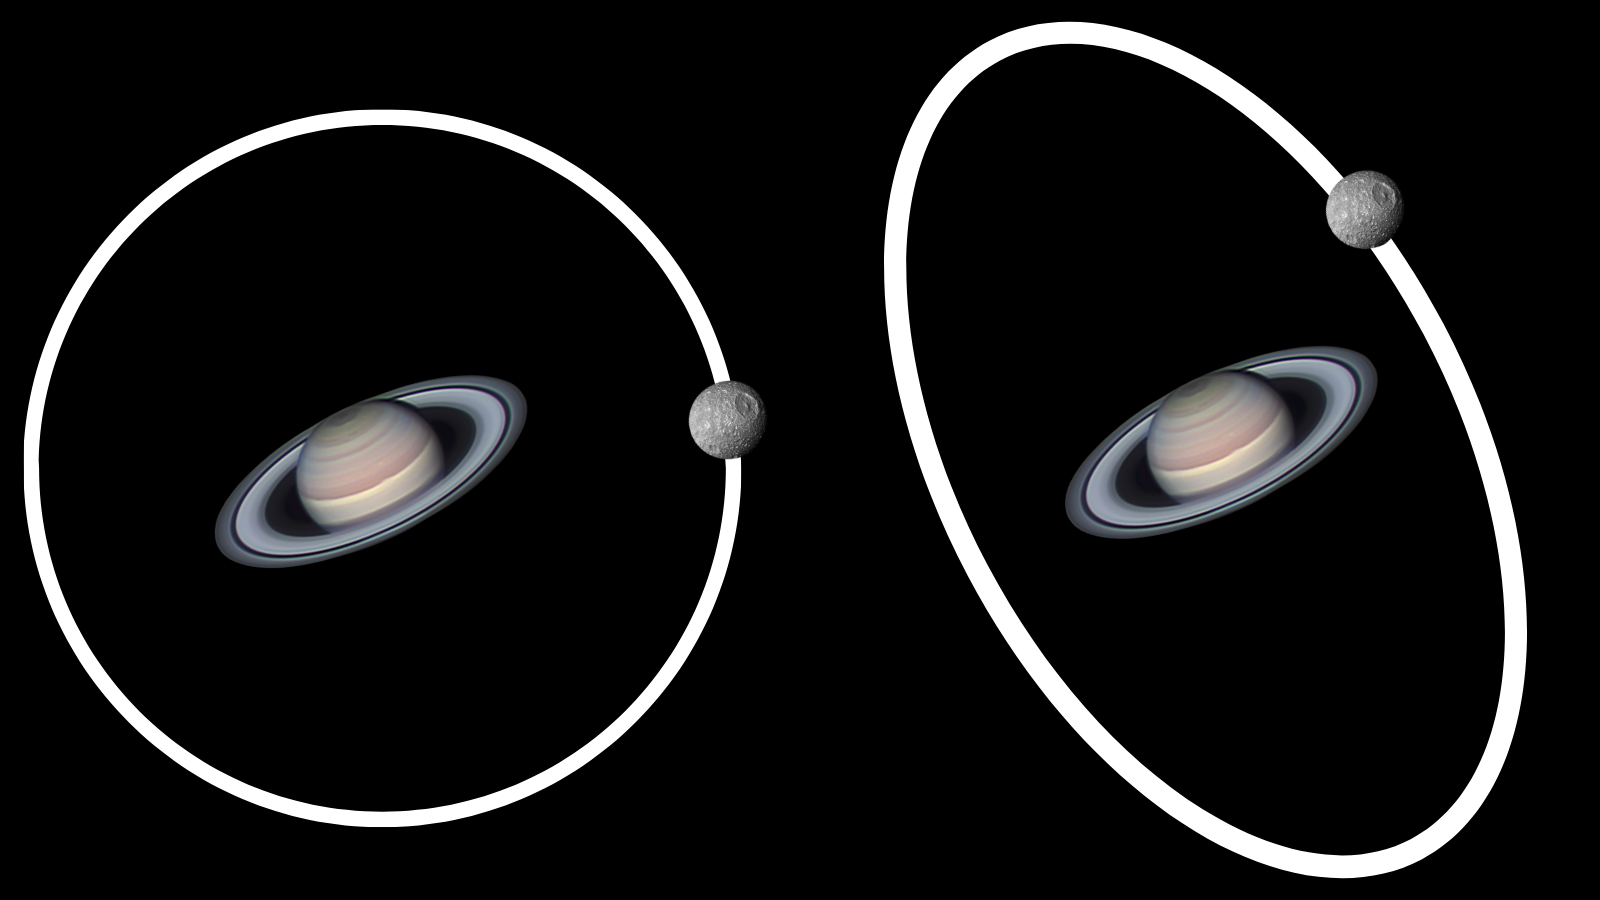 (Left) An orbital eccentricity of around 0.5 representing a circulary orbit. (Right) an orbit with an eccentricity of 0.5